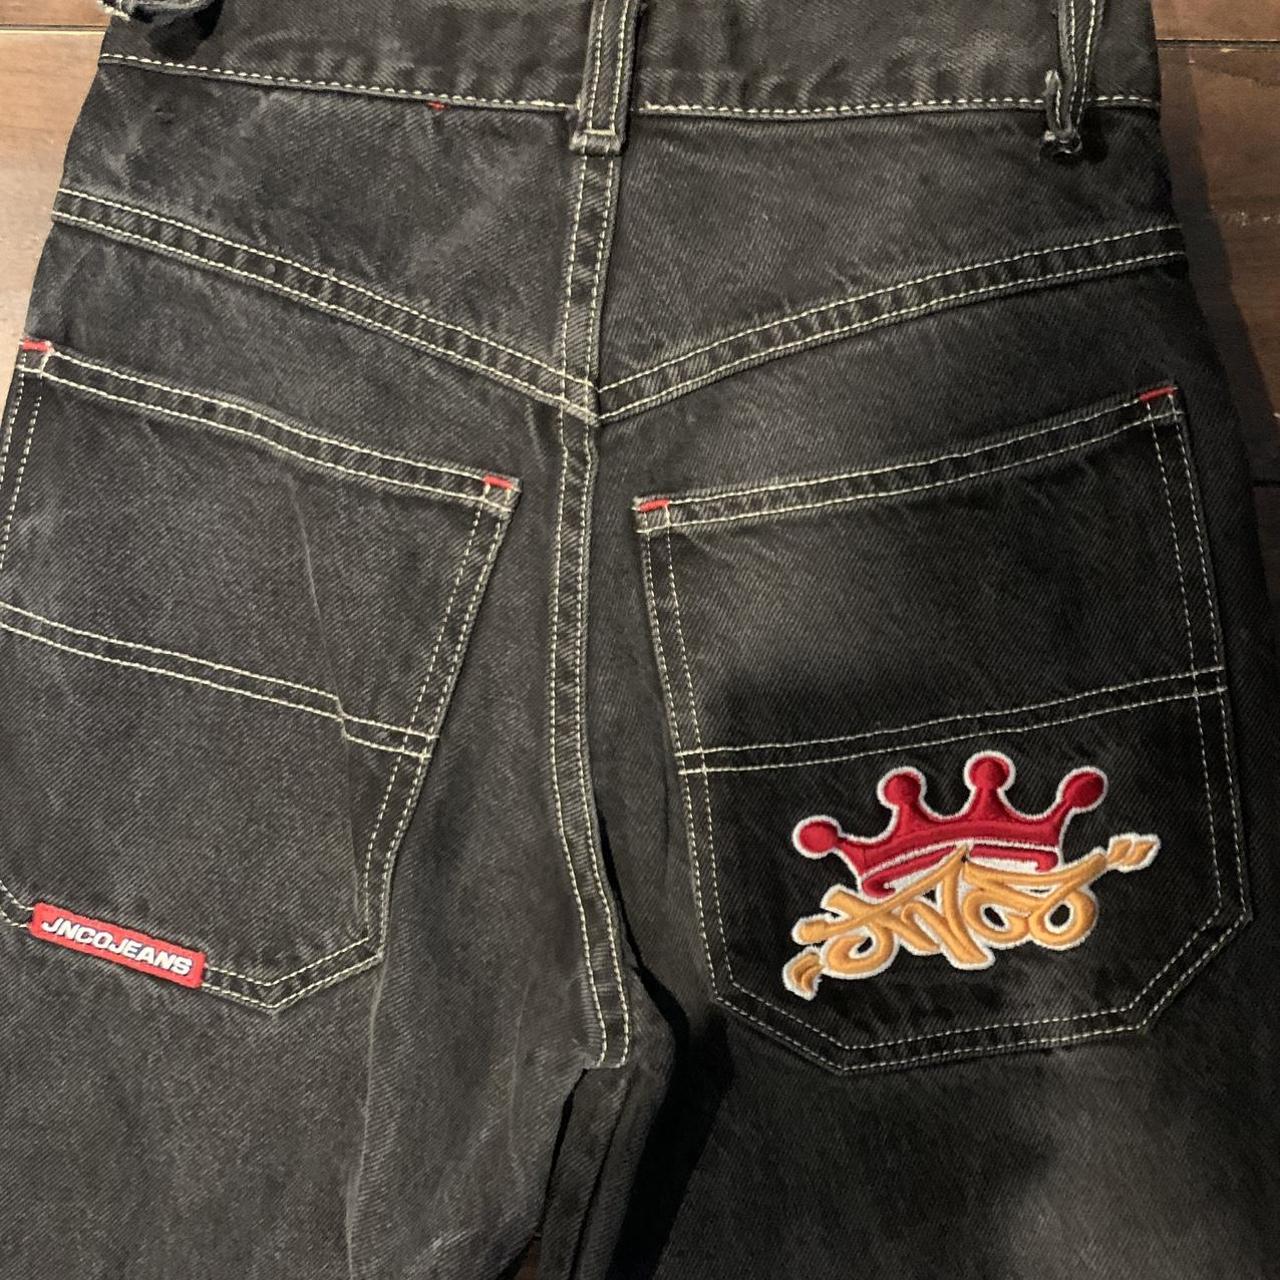 Black White Stitch Jnco Jeans with embroidery -boys... - Depop